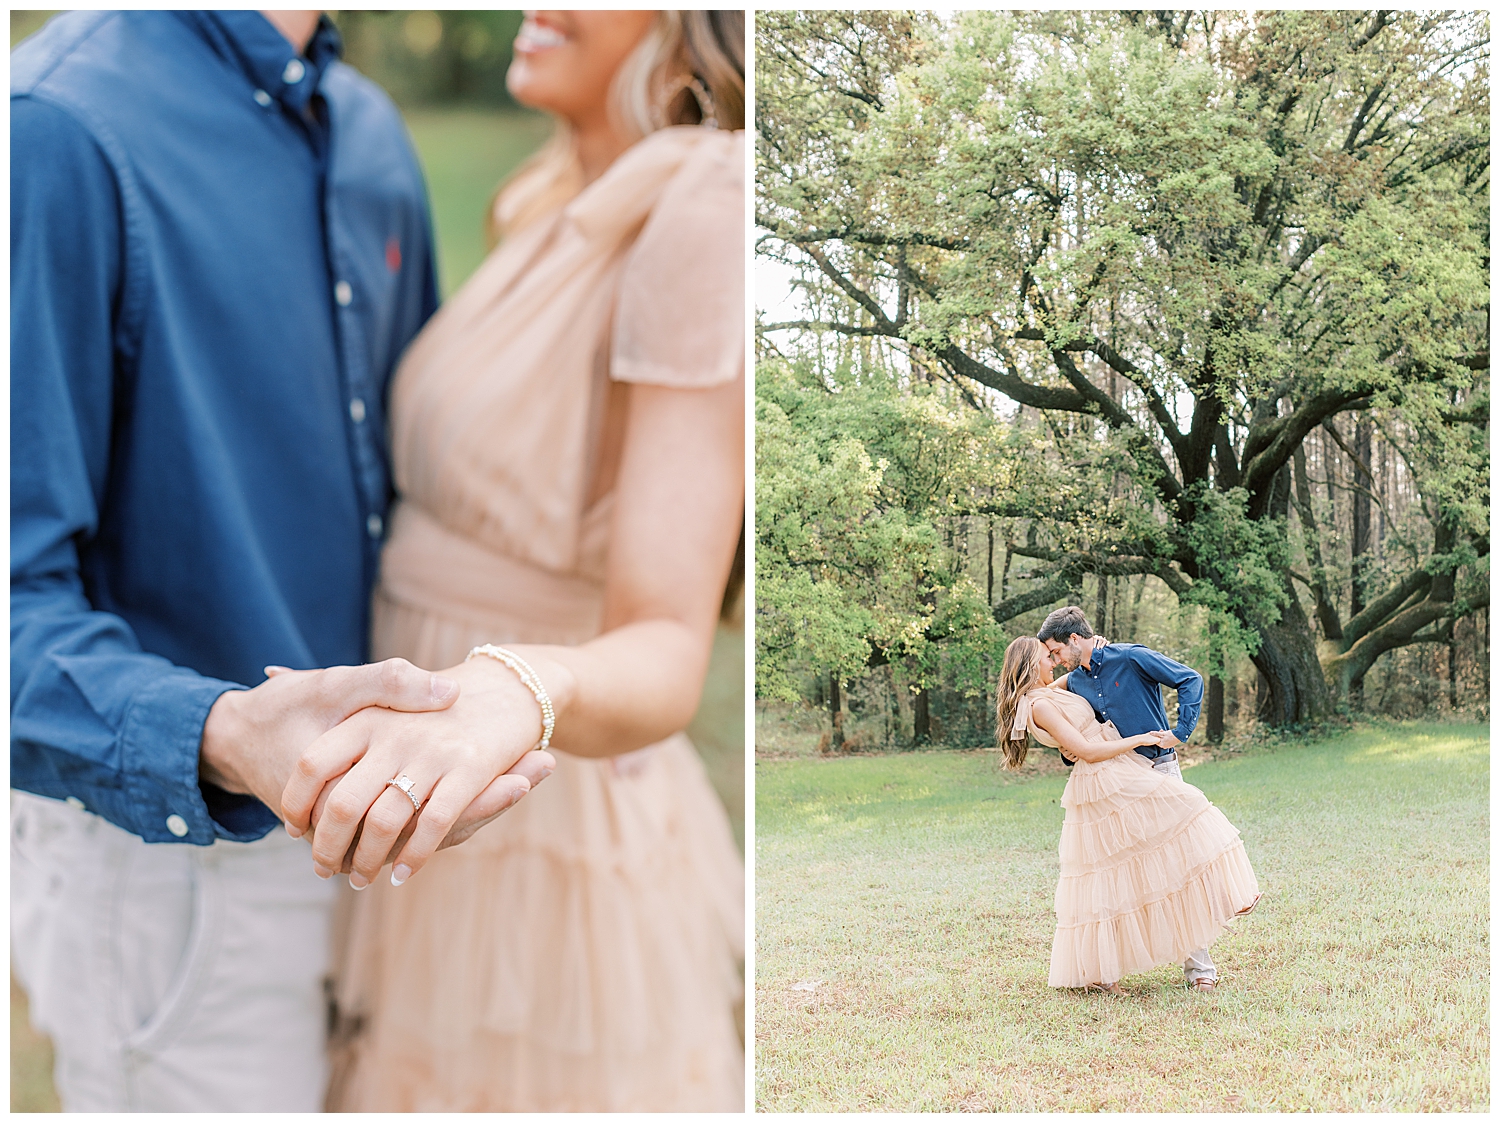 A couple shows off the engagement ring for their spring engagement photos.